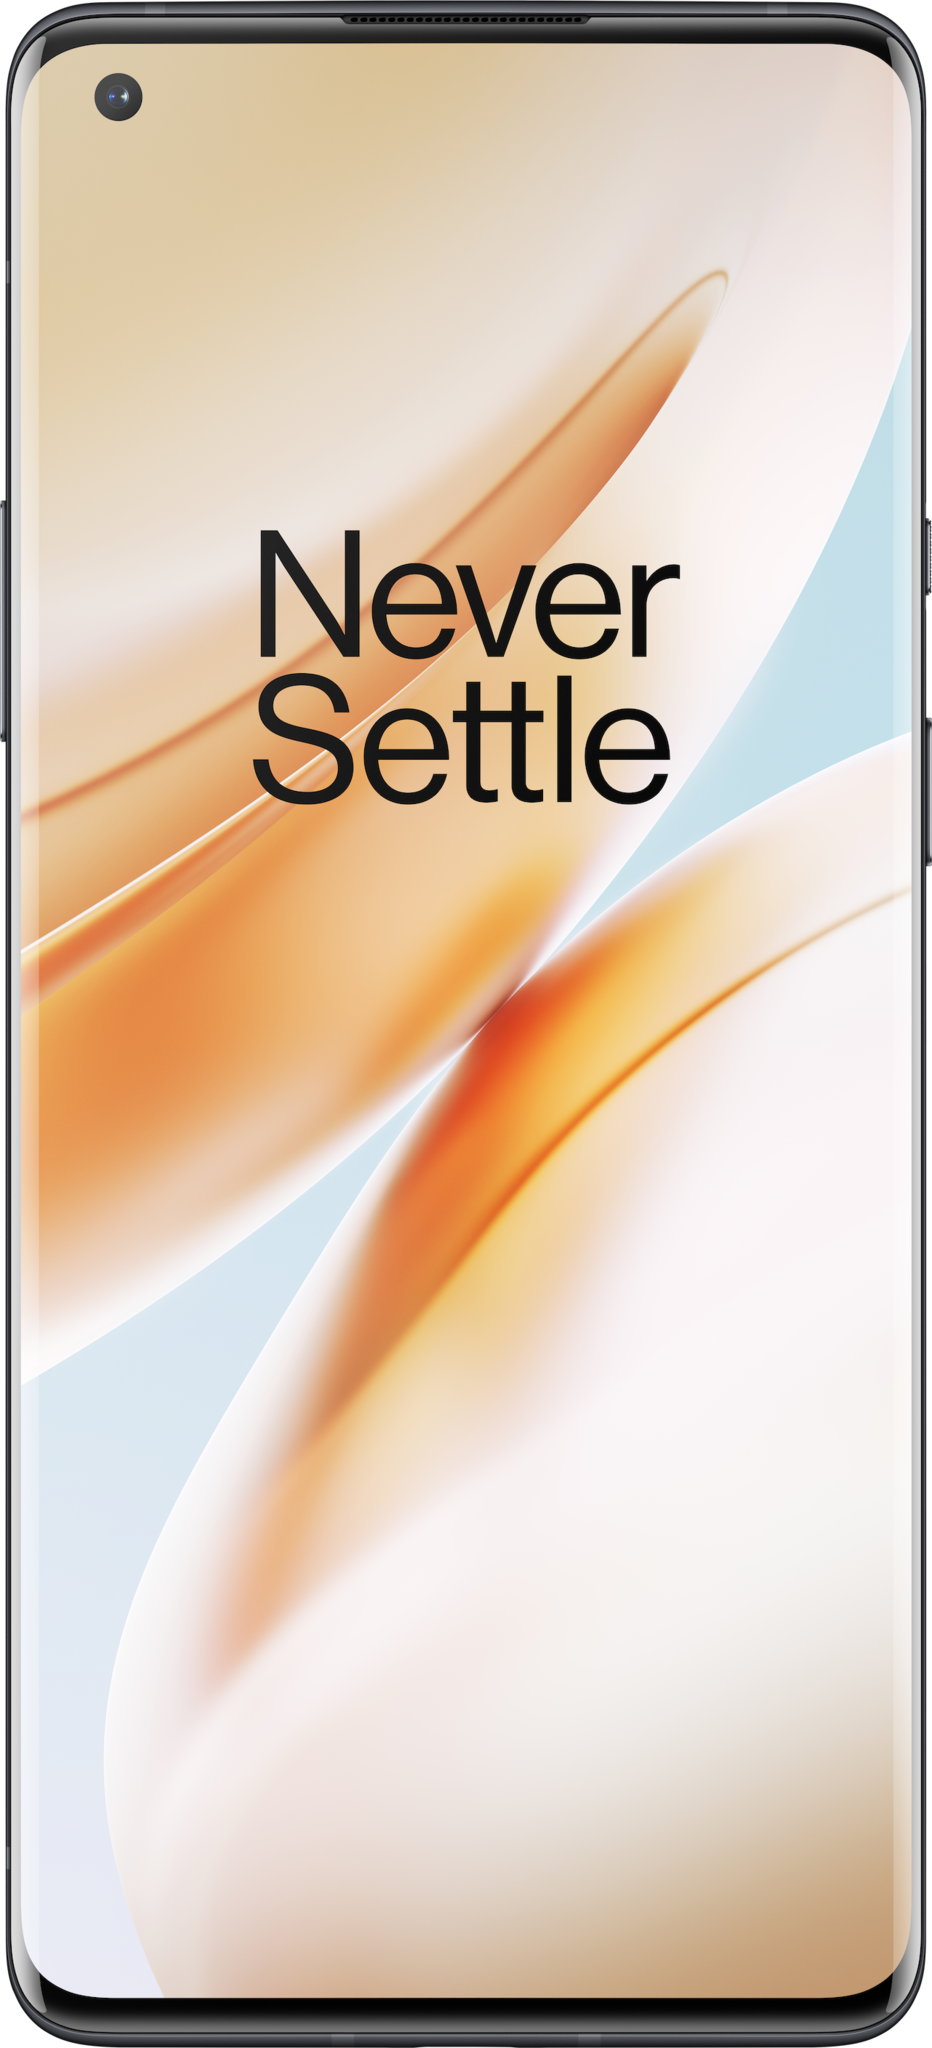 oneplus-8-pro-black-front-render.png?ito